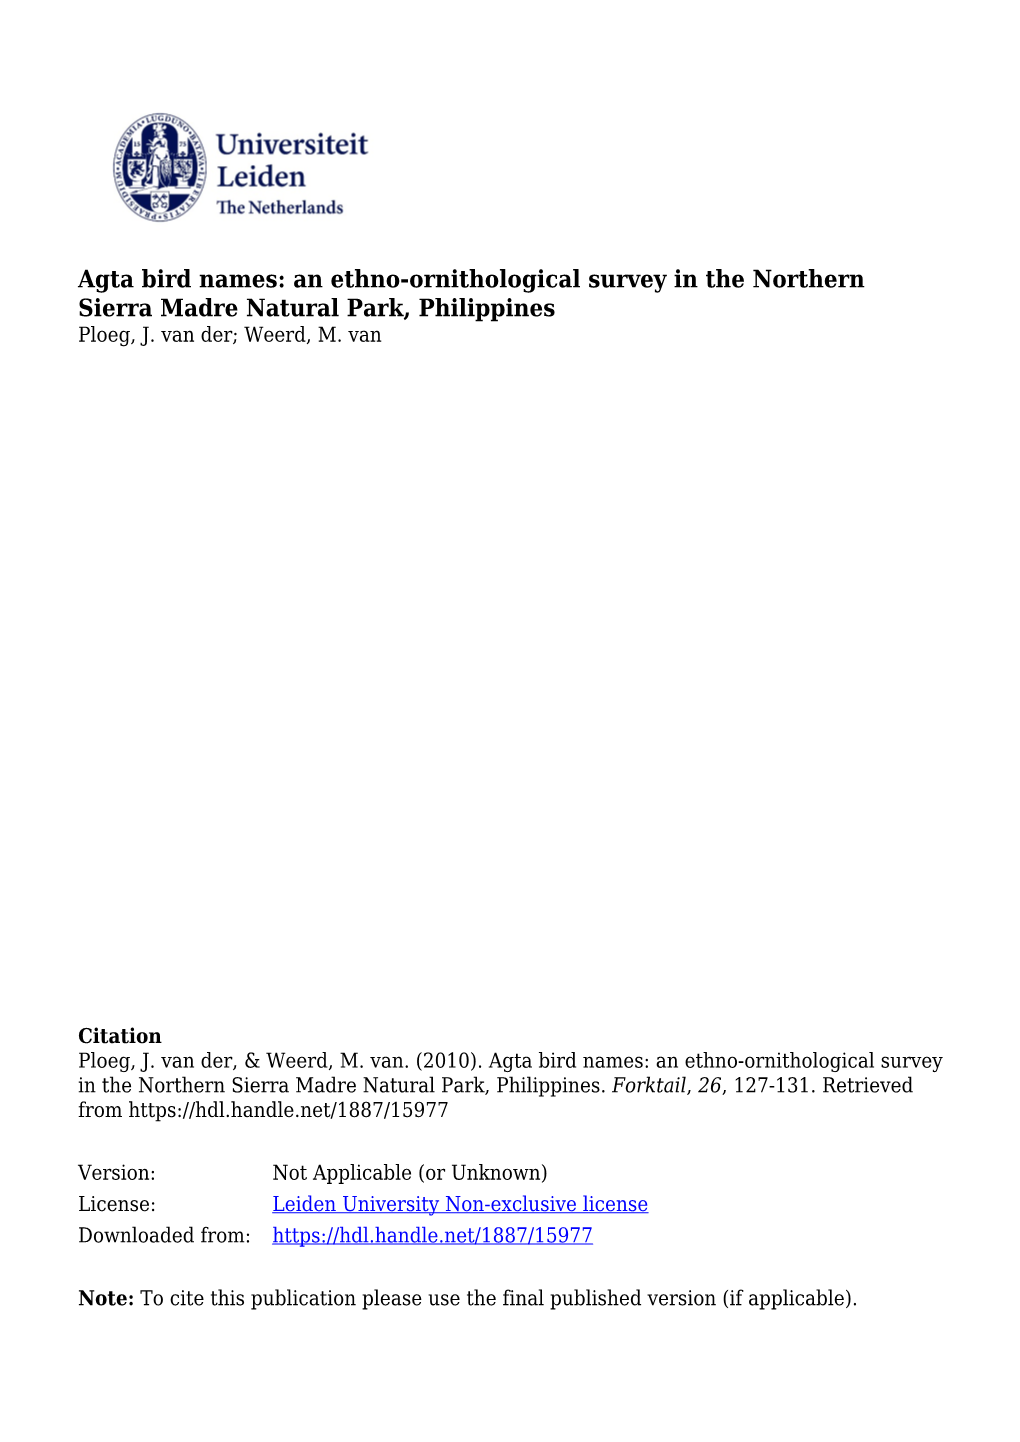 Agta Bird Names: an Ethno-Ornithological Survey in the Northern Sierra Madre Natural Park, Philippines Ploeg, J